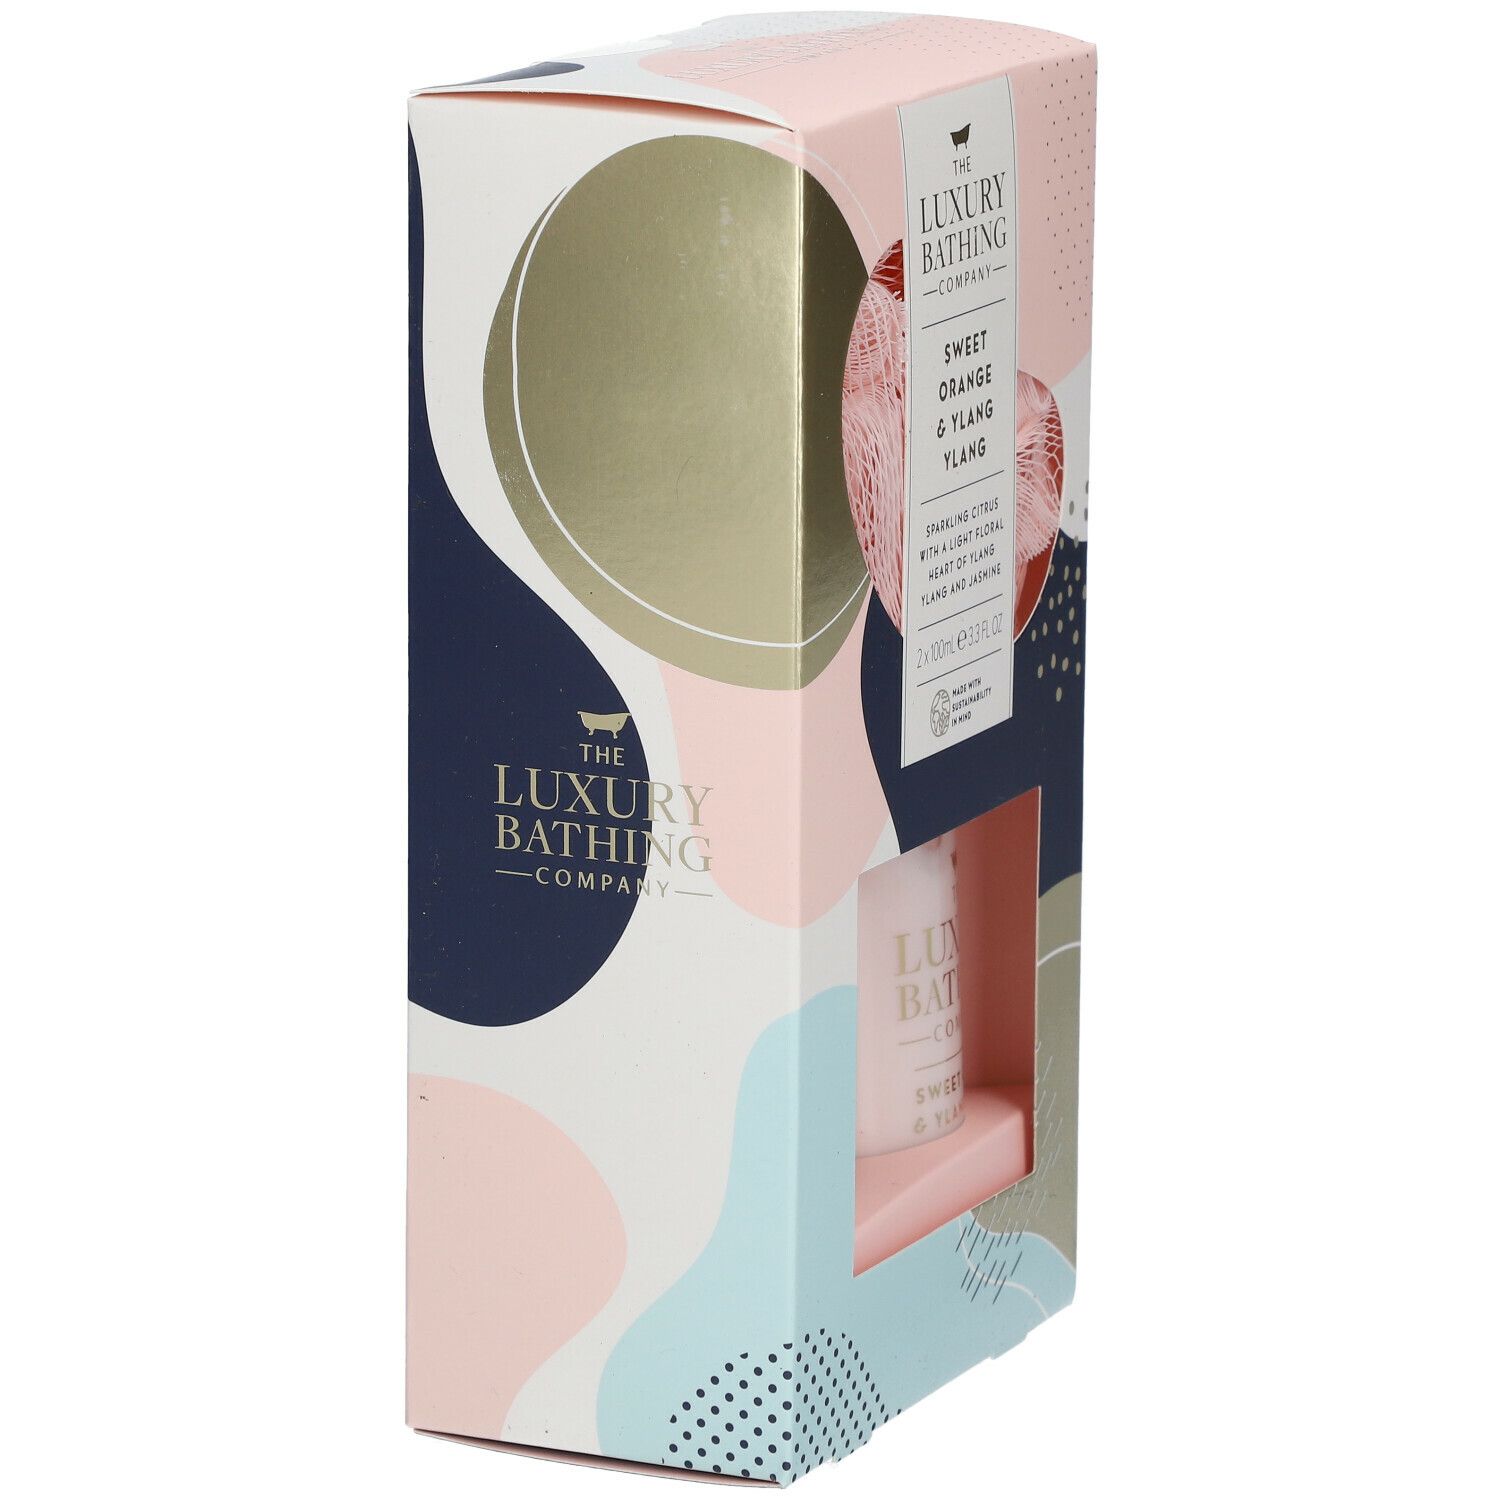 The Luxury Bathing Company Coffret ABSTRACT LAYERS Body Glow Essentials - Orange Sucrée et Ylang-Ylang